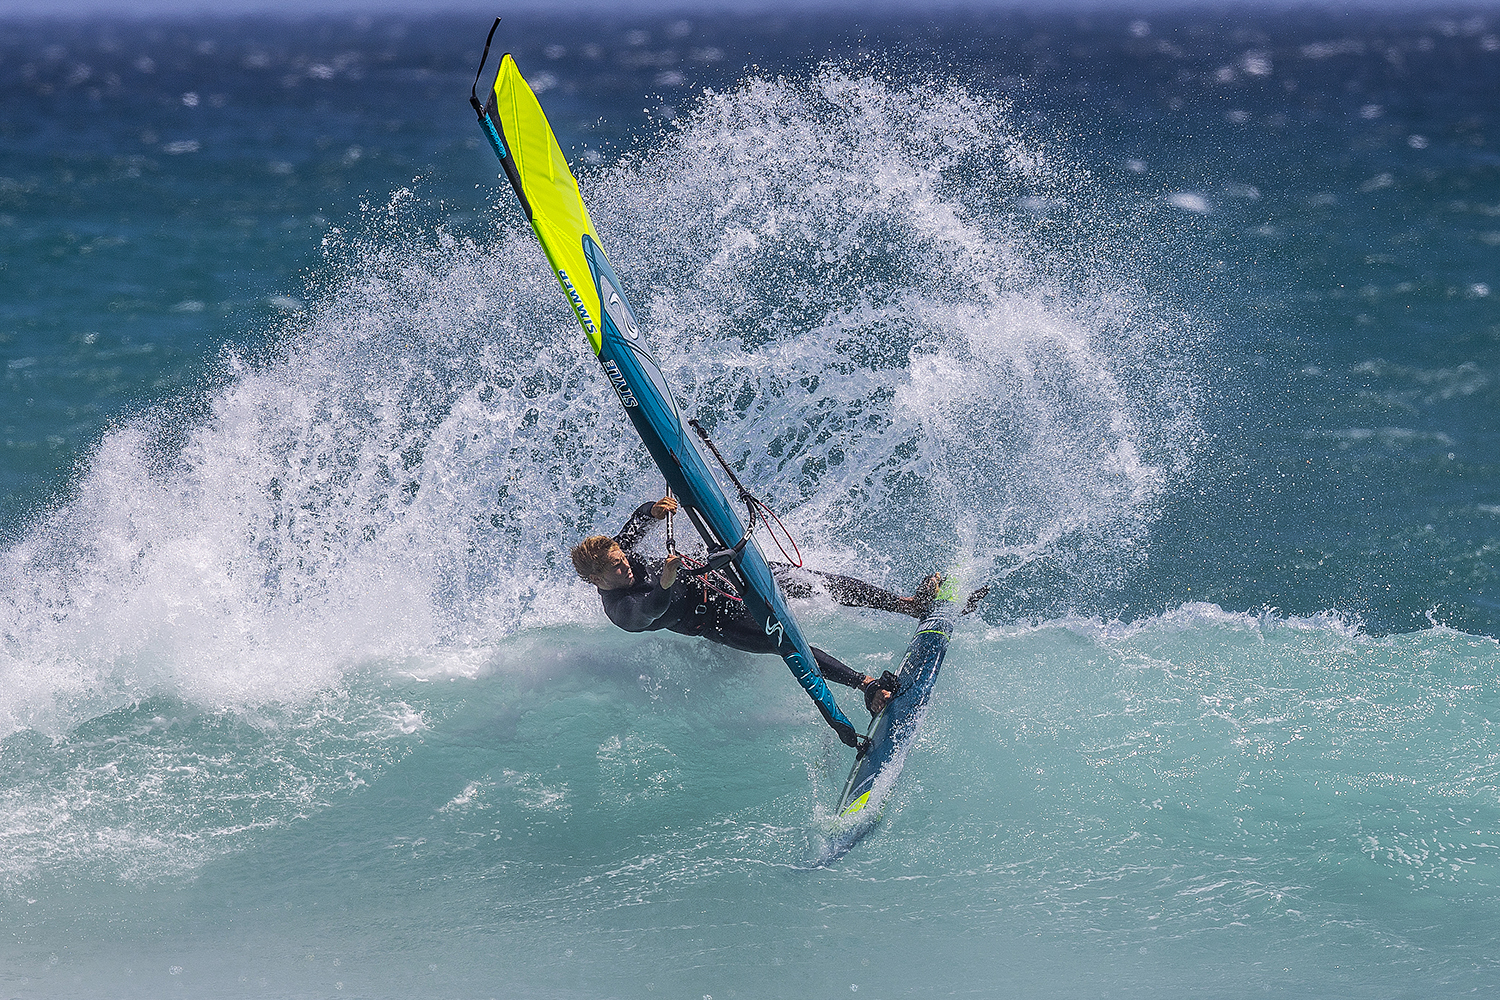 Alessio carving hard in Cape Town!